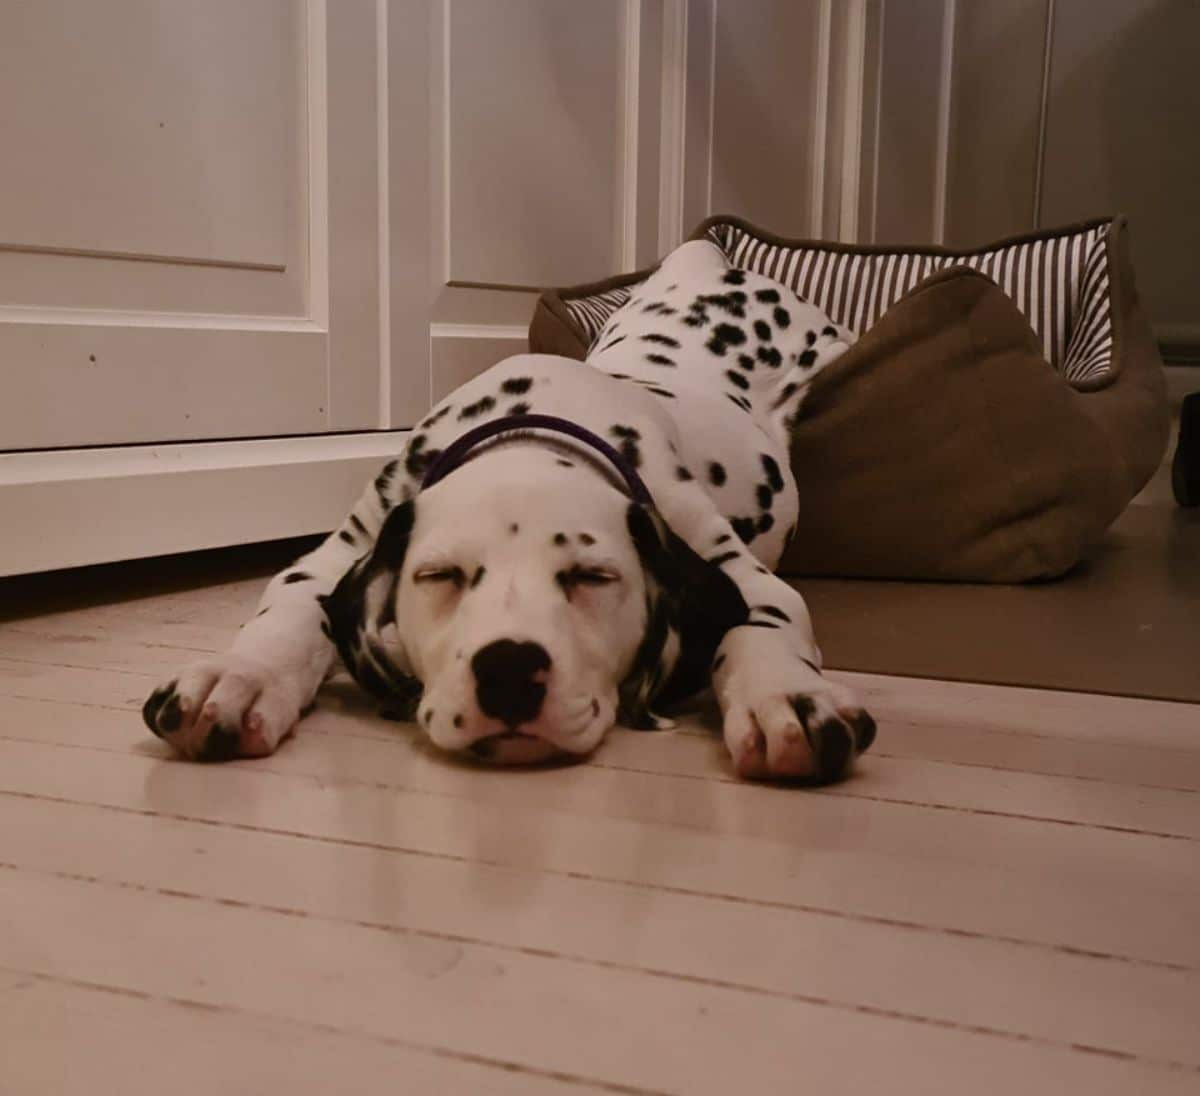 dalmation puppy sleeping with the back half in a brown dog bed and the rest of the body resting on a wooden floor